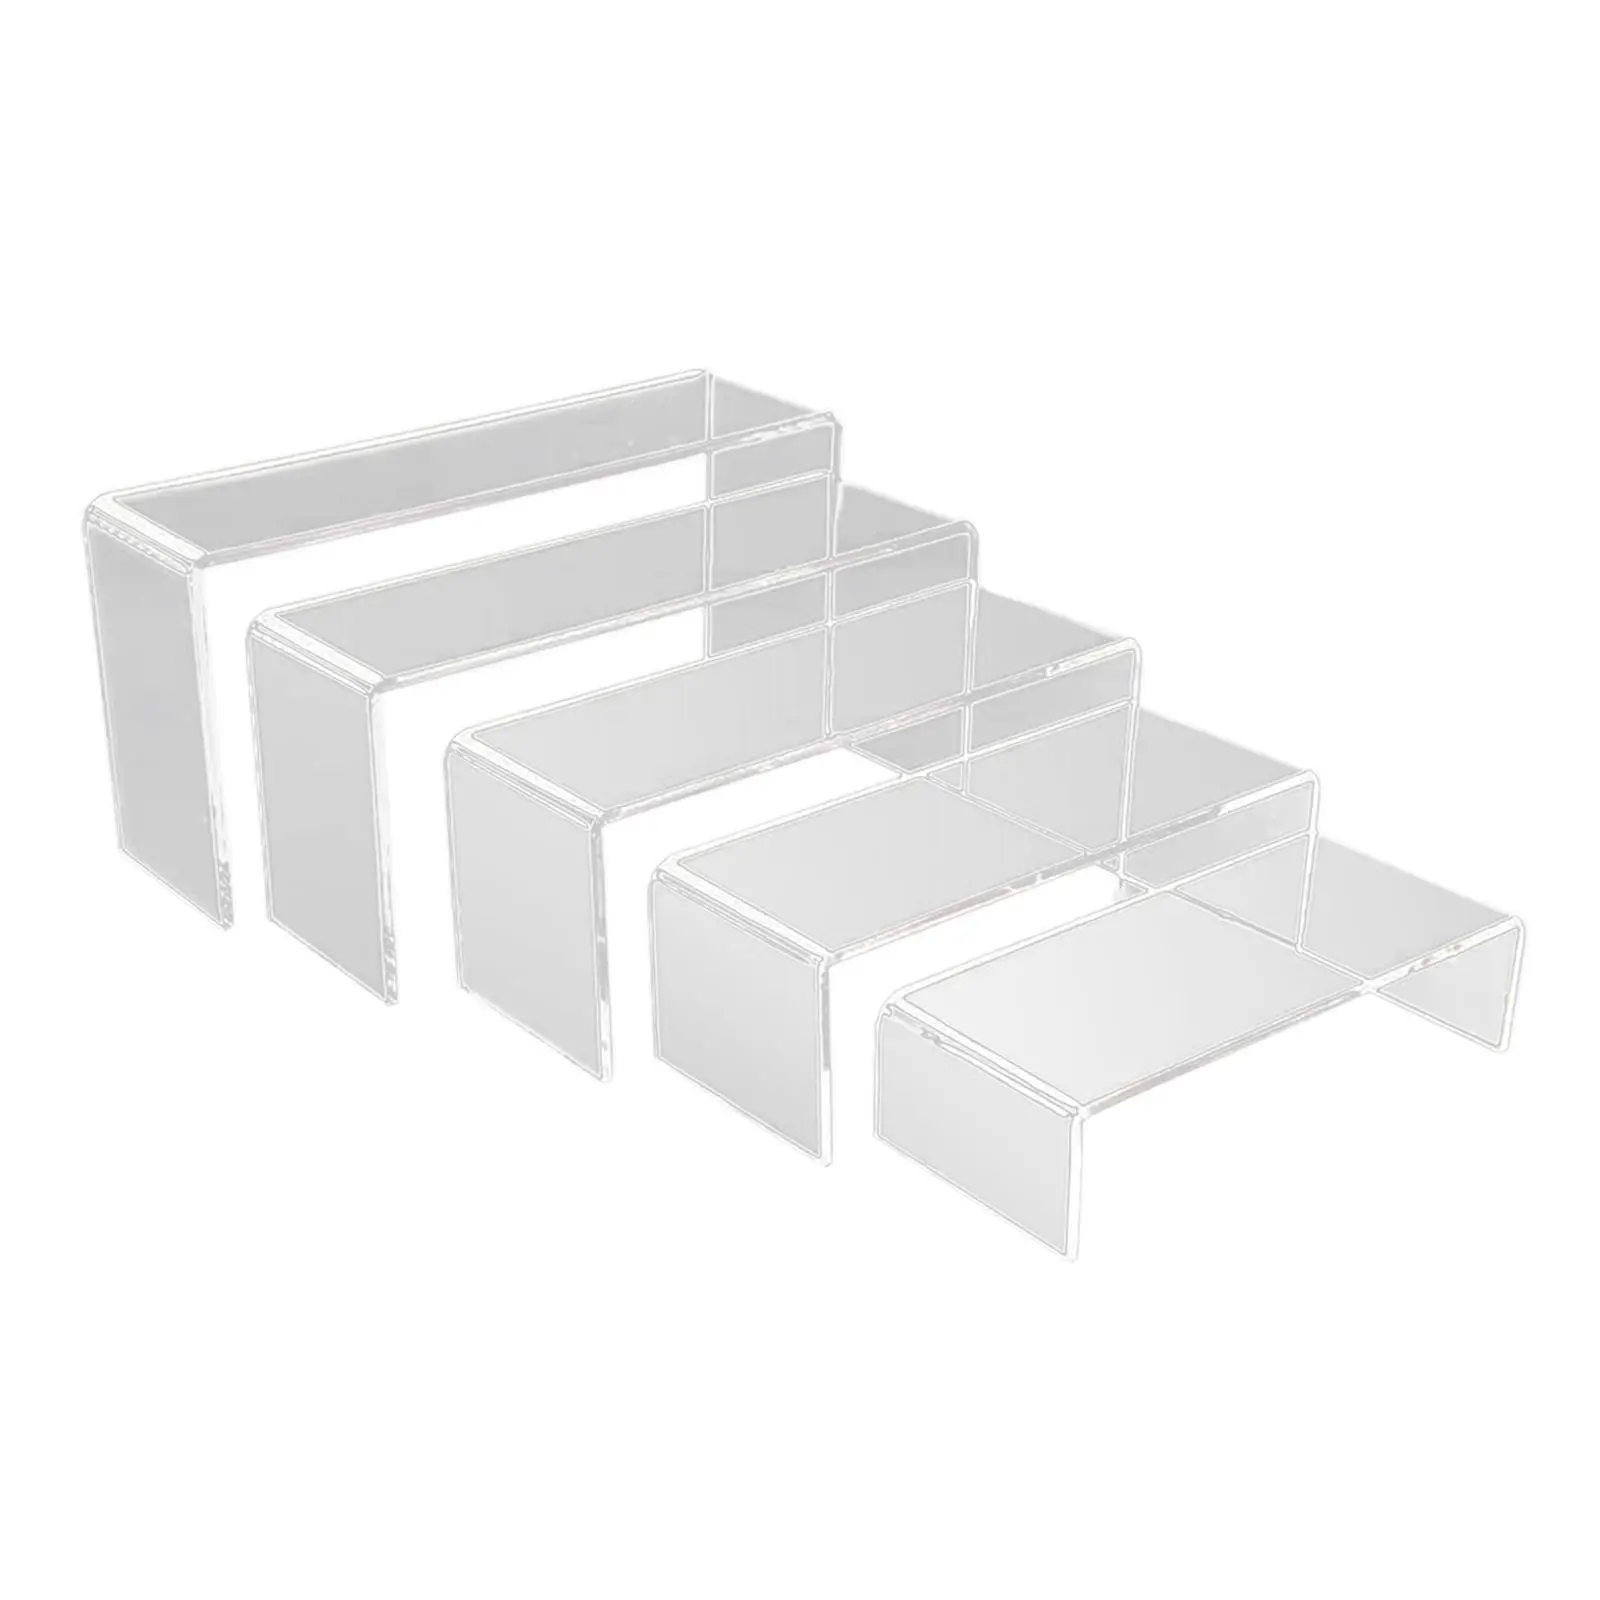 5x Acrylic Display Risers Display Collectibles for Jewelry Perfume Cupcakes